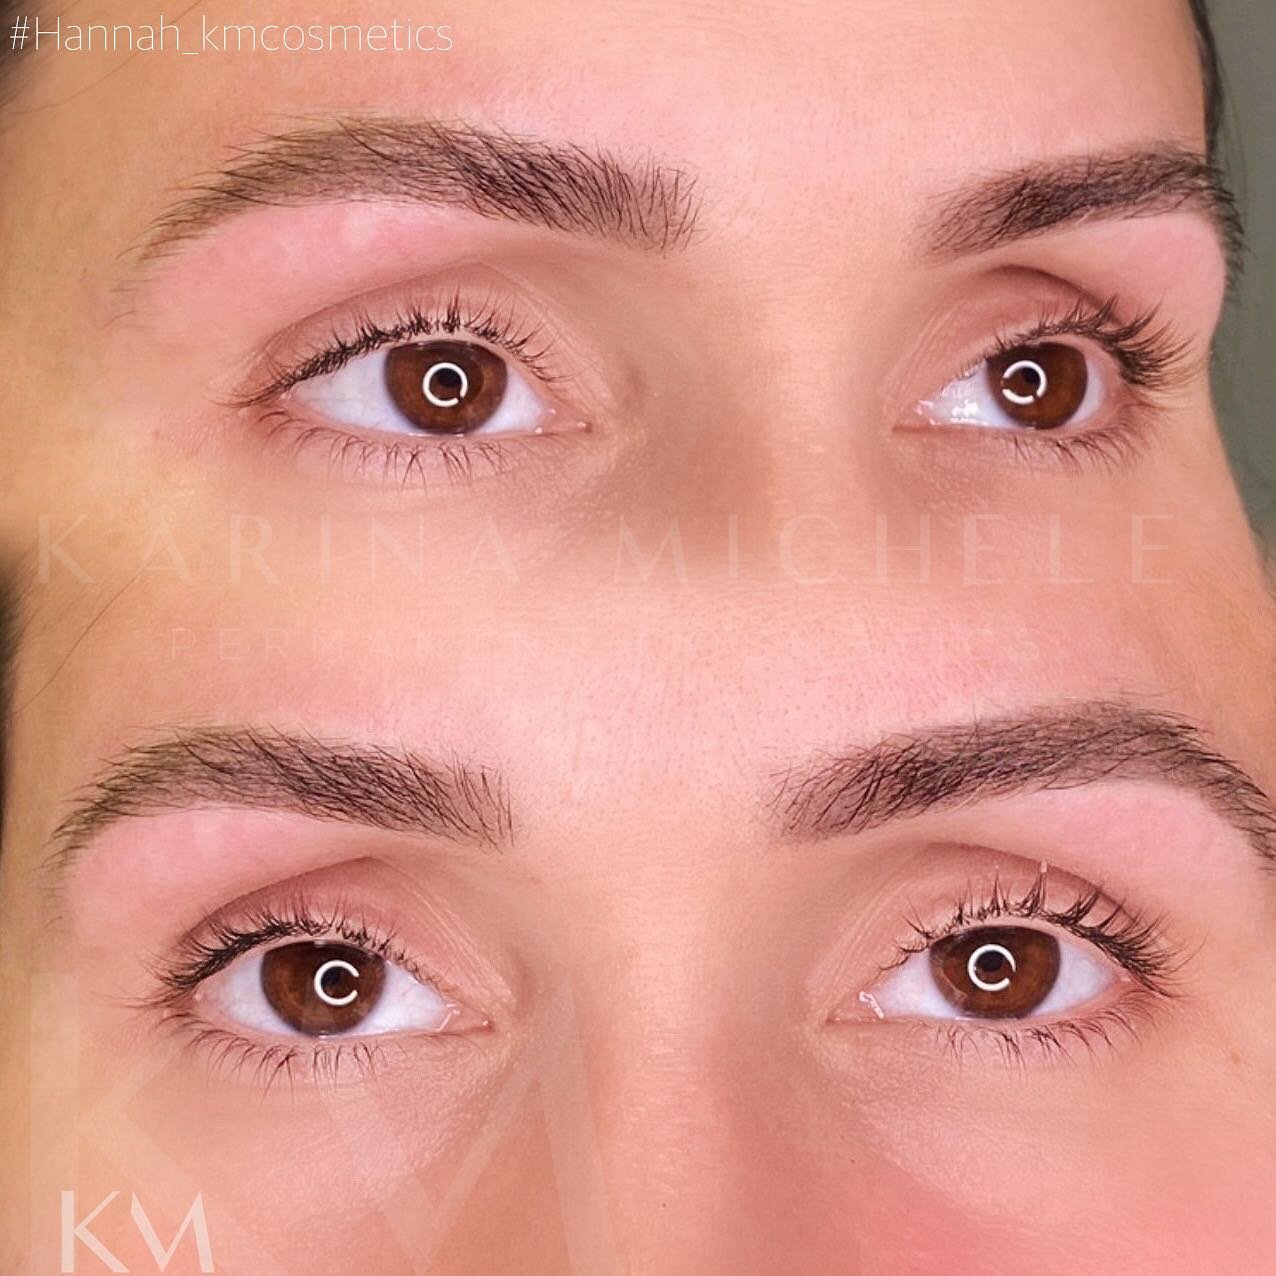 Powder brows done by Hannah ✨ #hannah_kmcosmetics 

Hannah has been working with us for almost two years and was trained by yours truly since day one 😘. You are in great hands with Hannah! Check out more of her work under the hashtag #hannah_kmcosme